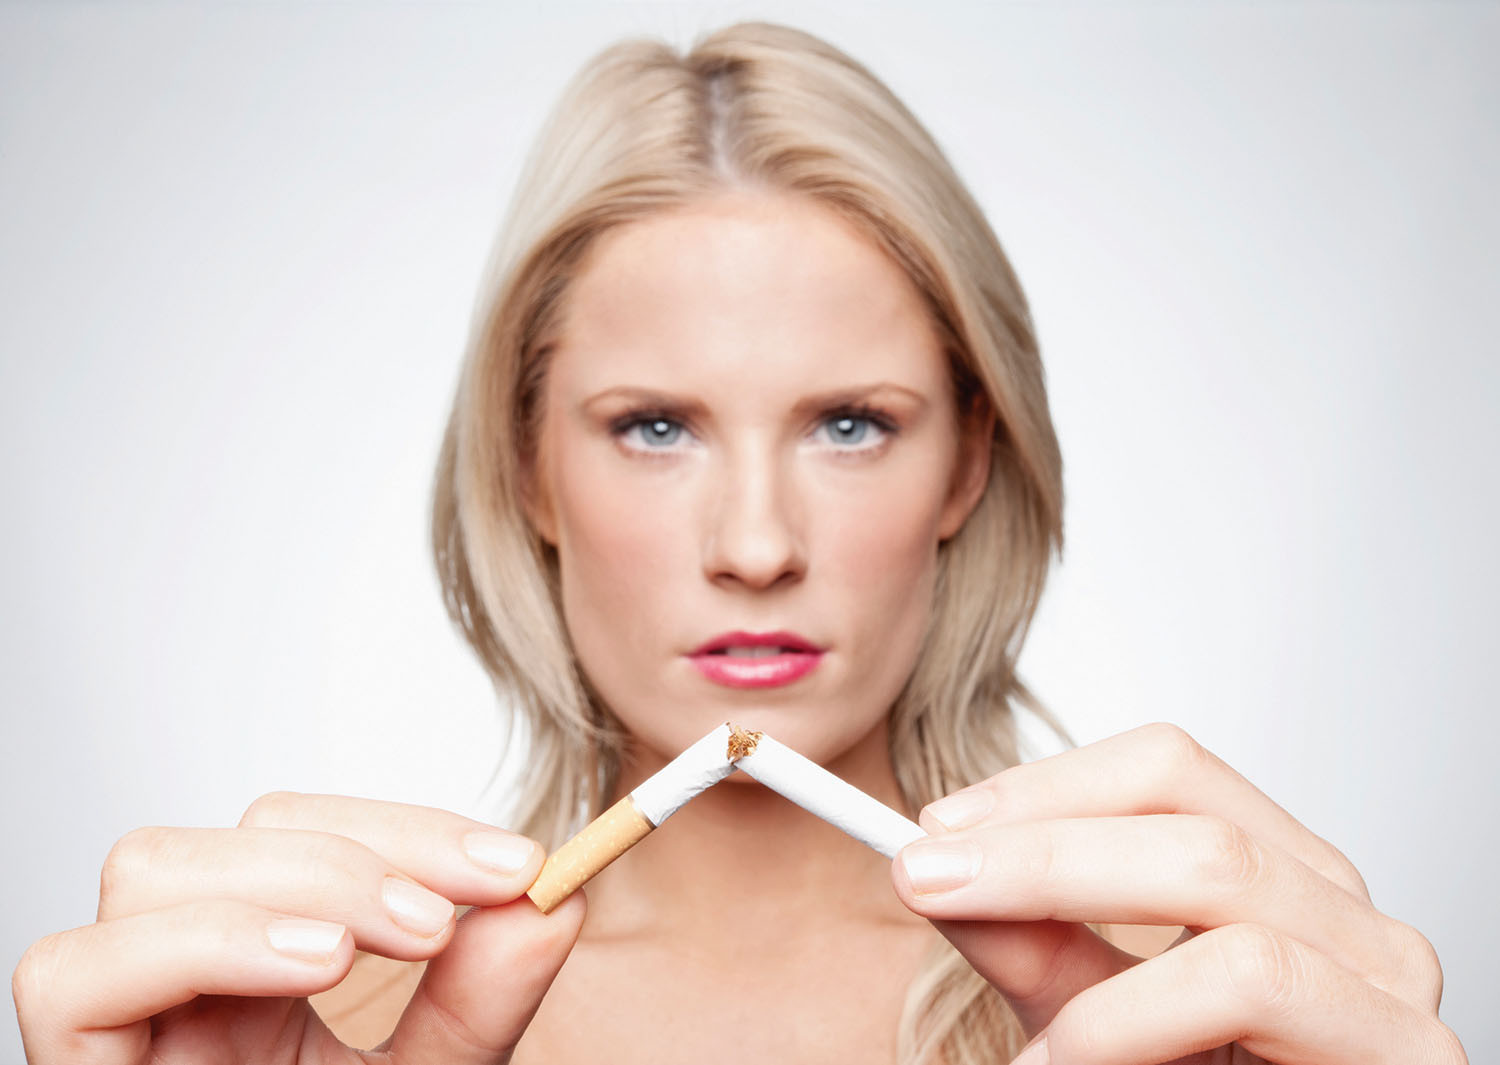 photo of a woman breaking a cigarette in half while looking directly at the camera